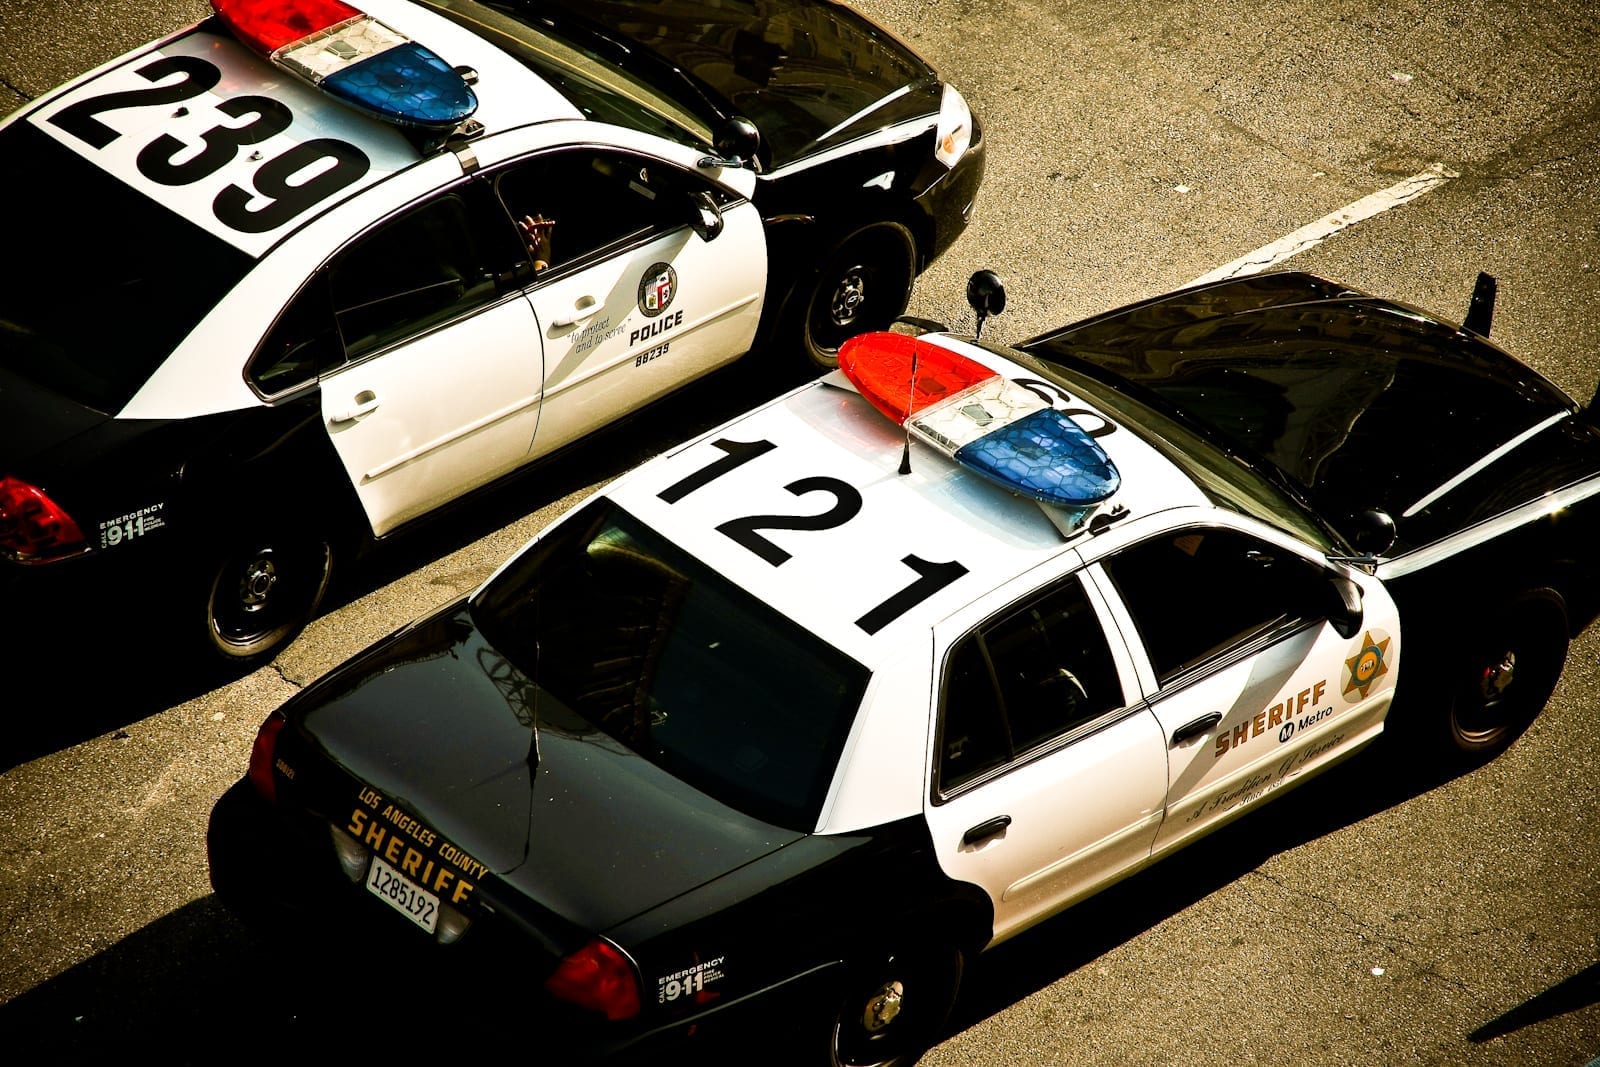 Police cars of the Los Angeles County Sheriff: image by James (Flickr: Old and new police cars), CC BY 2.0, via Wikimedia Commons, no changes.